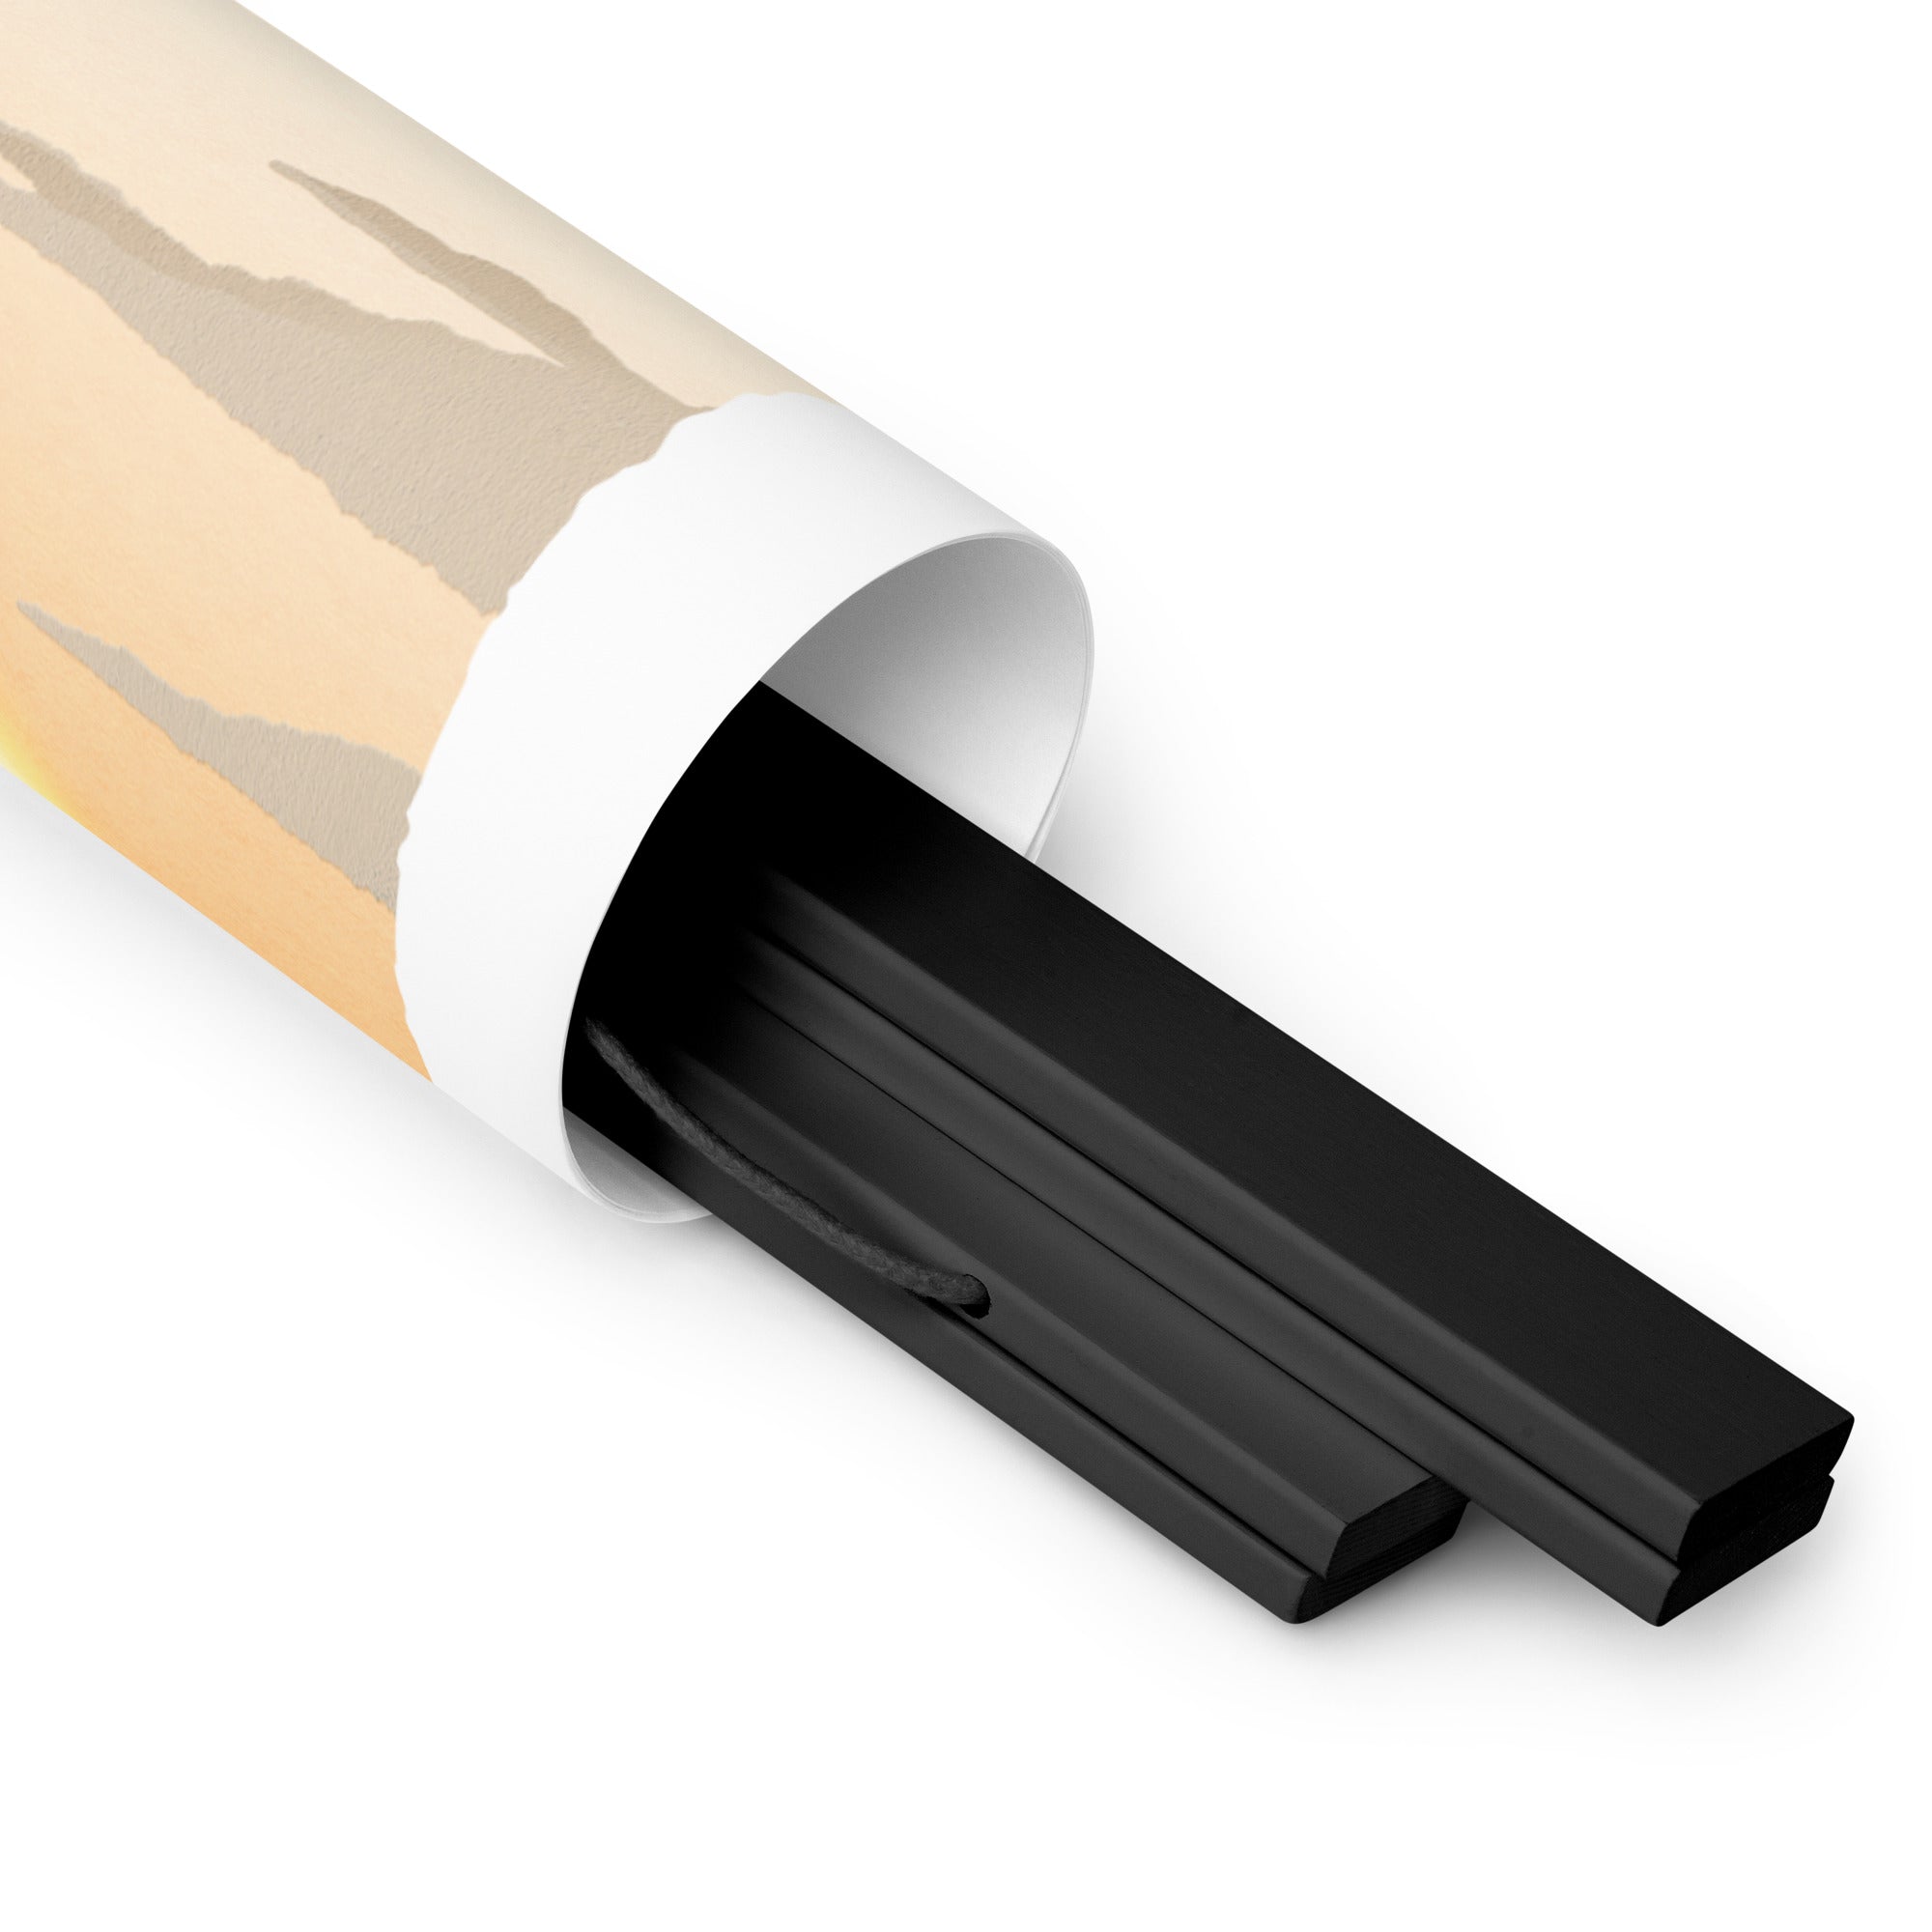 A custom tube with a black and white stripe on it.